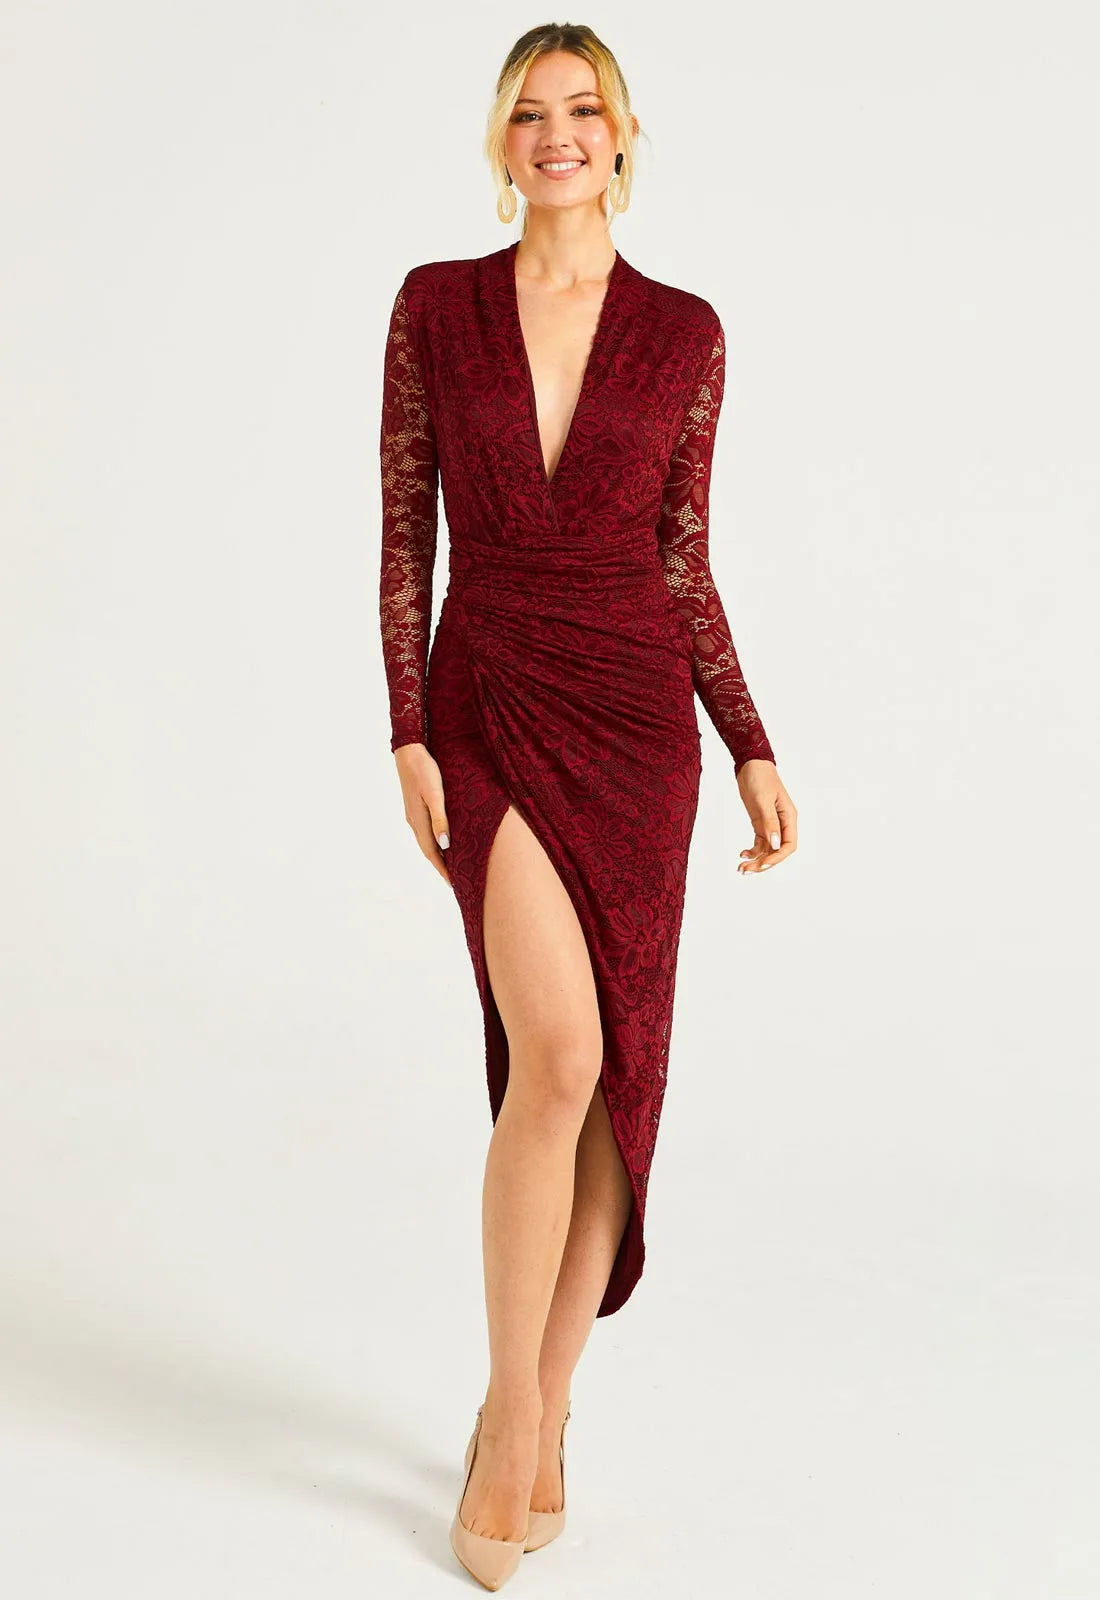 Burgundy lace sleeve tie front cocktail dress